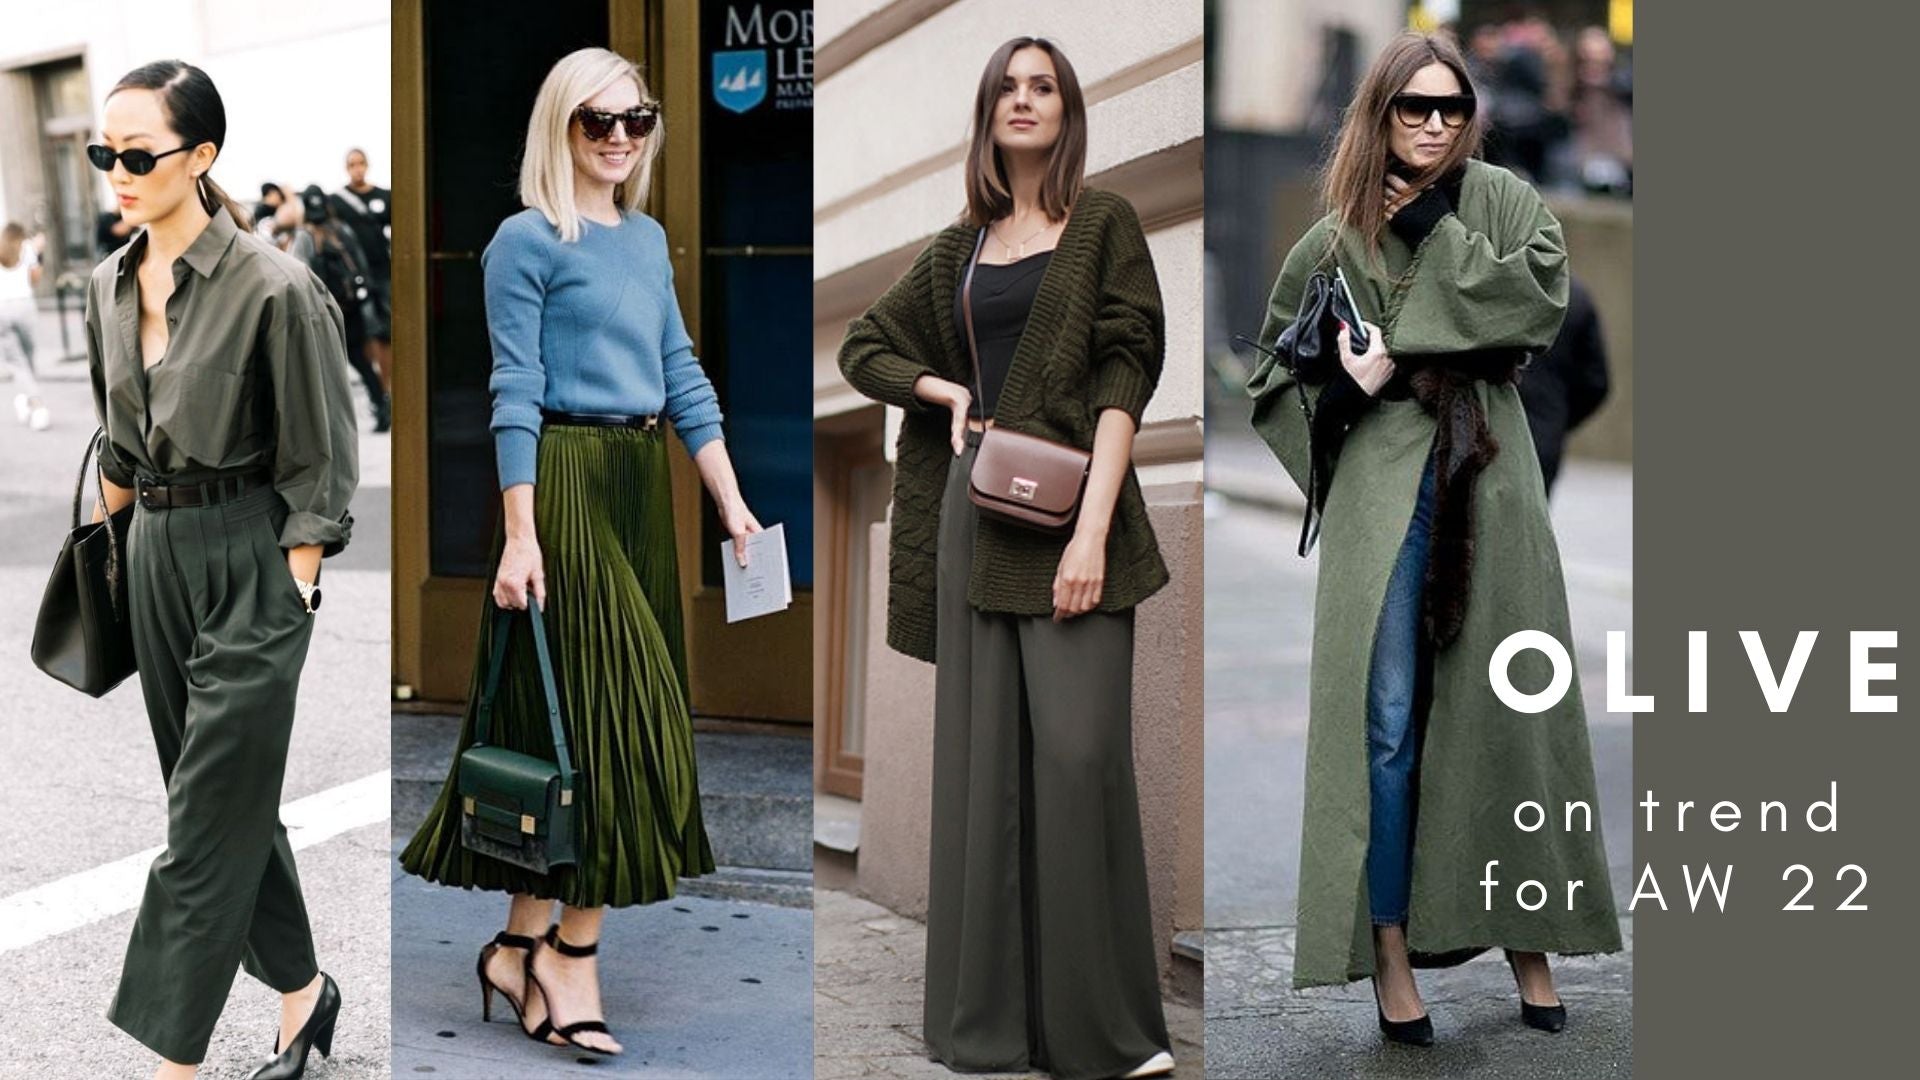 What colours are On Trend for AW 22? ~ Focus on Olive Green